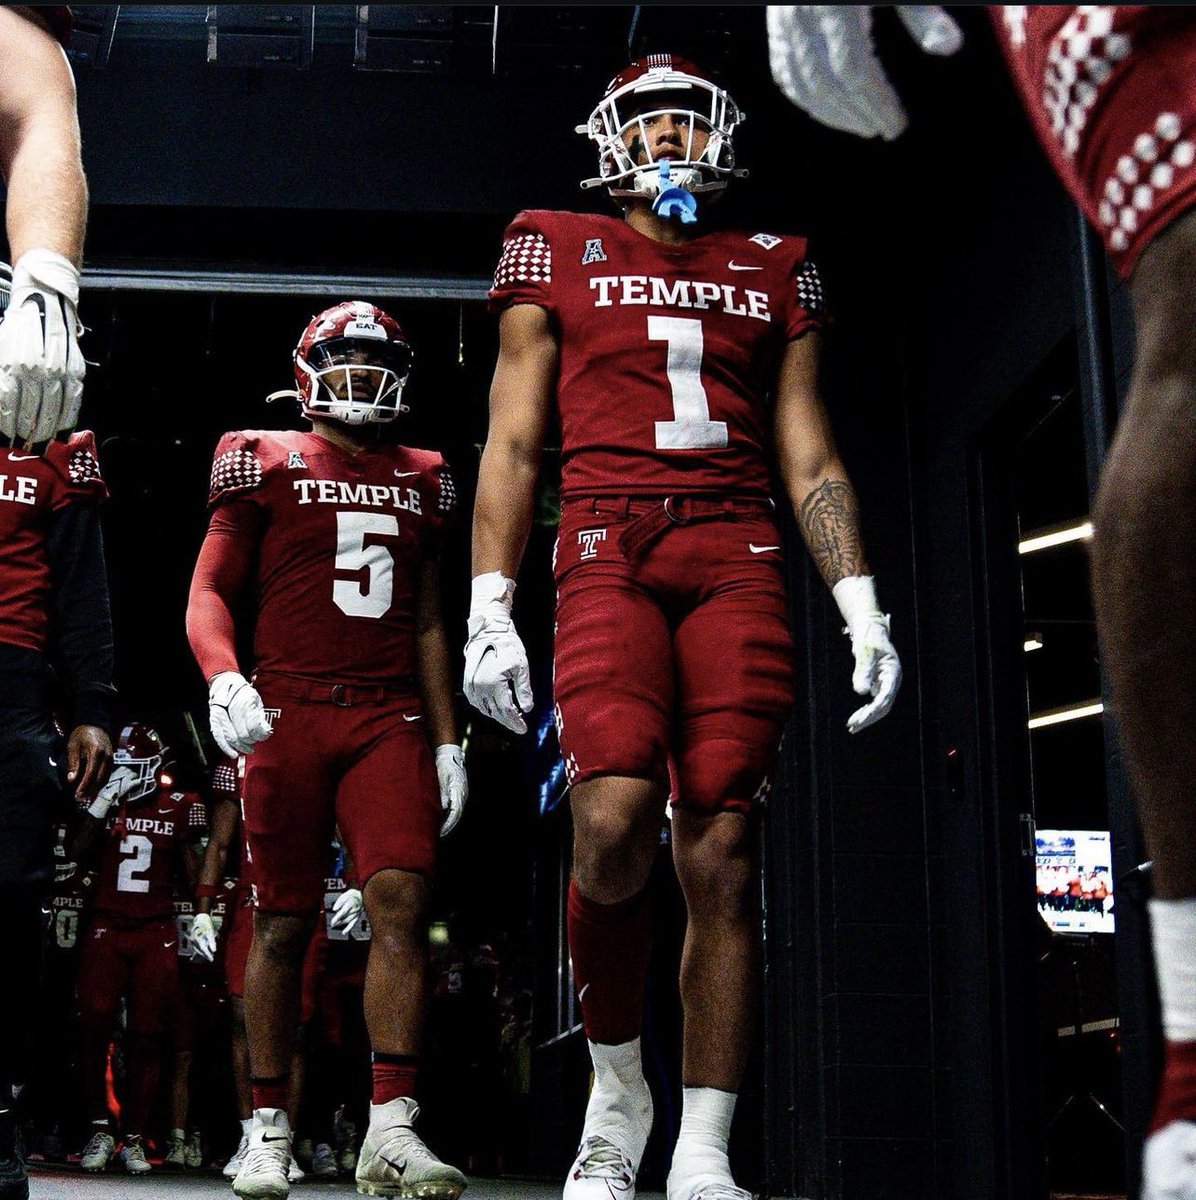 #AGTG Blessed to receive an offer from Temple University! #GoOwls @CoachWiesehan @Temple_FB @CoachGroneqb @MrLeggo1 @hdcoach_mark @Coach_Rut